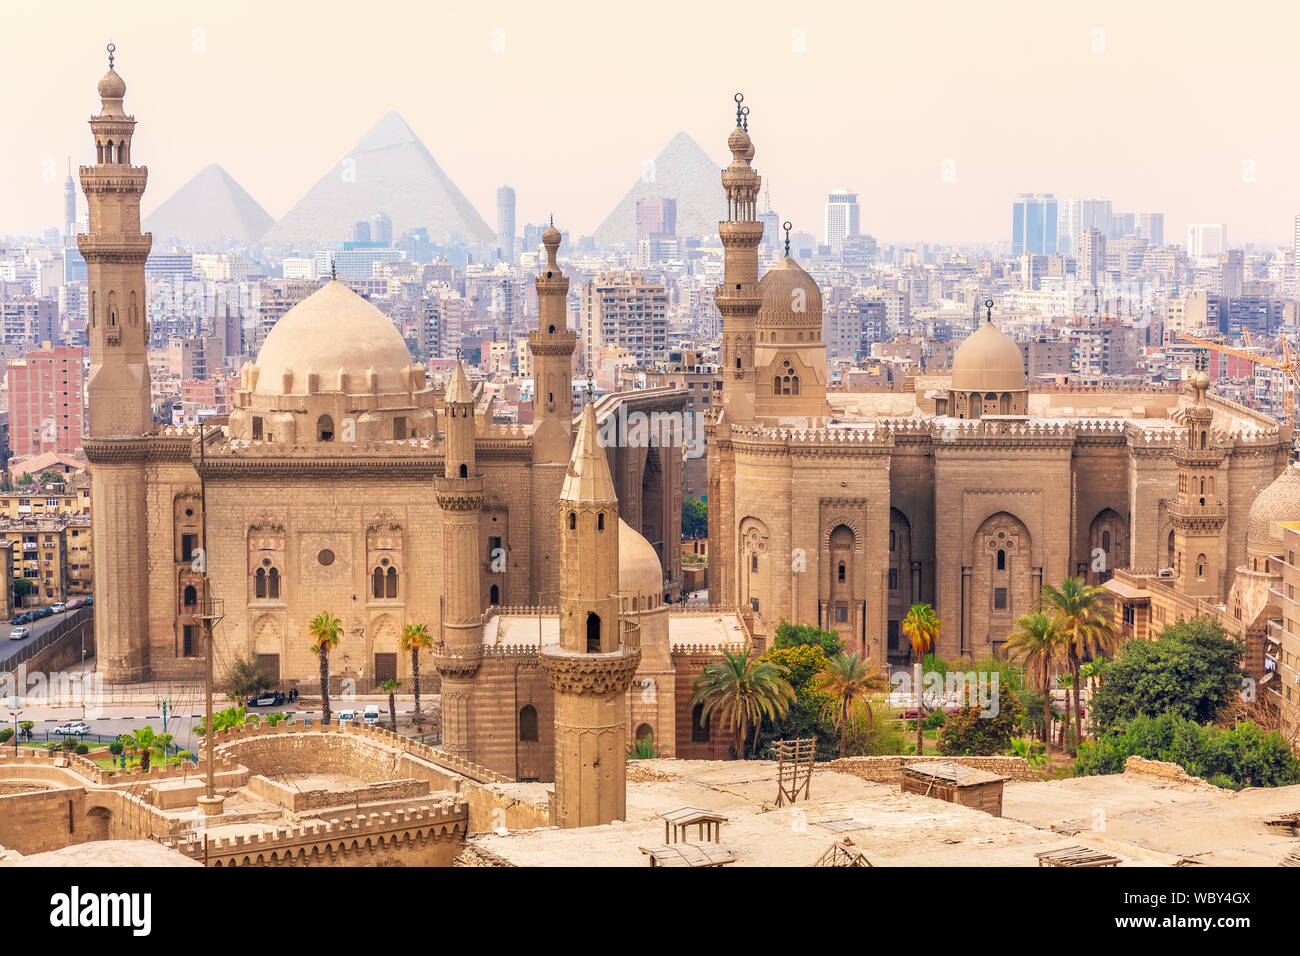 Mosque-Madrassa of Sultan Hassan in the Old city of Cairo, Egypt Stock Photo